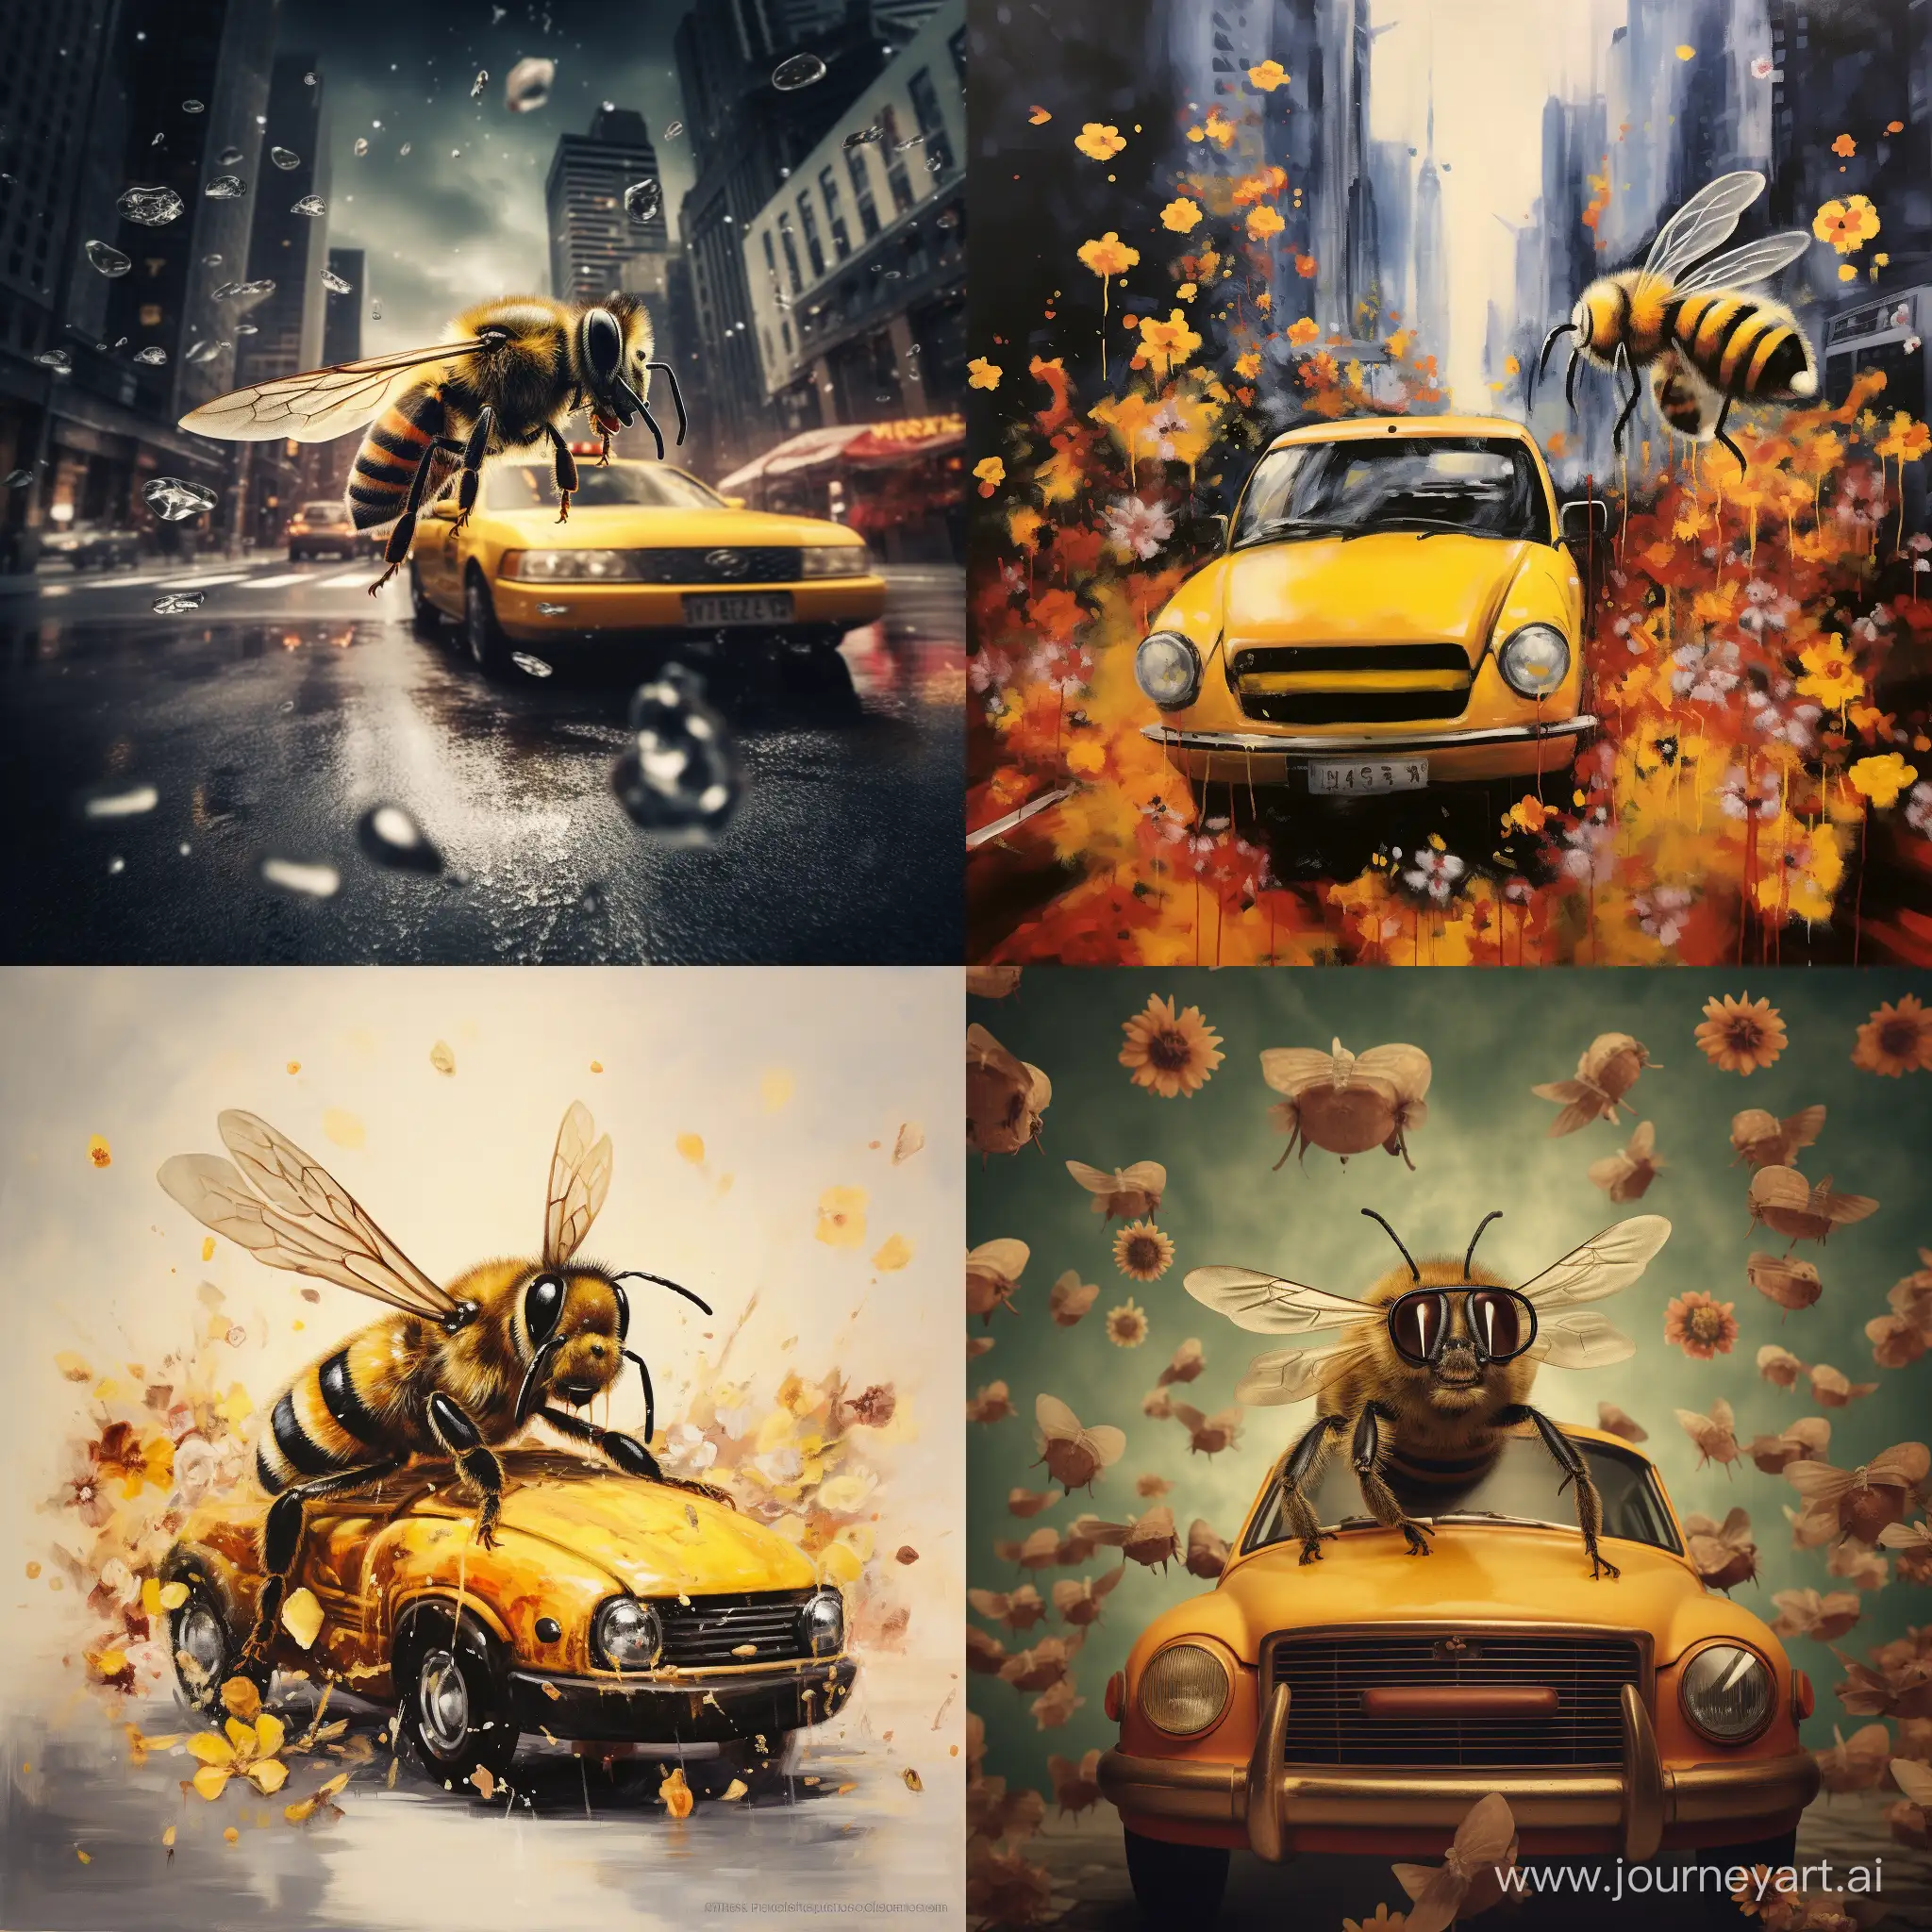 Busy-Bee-Commuting-in-a-Taxi